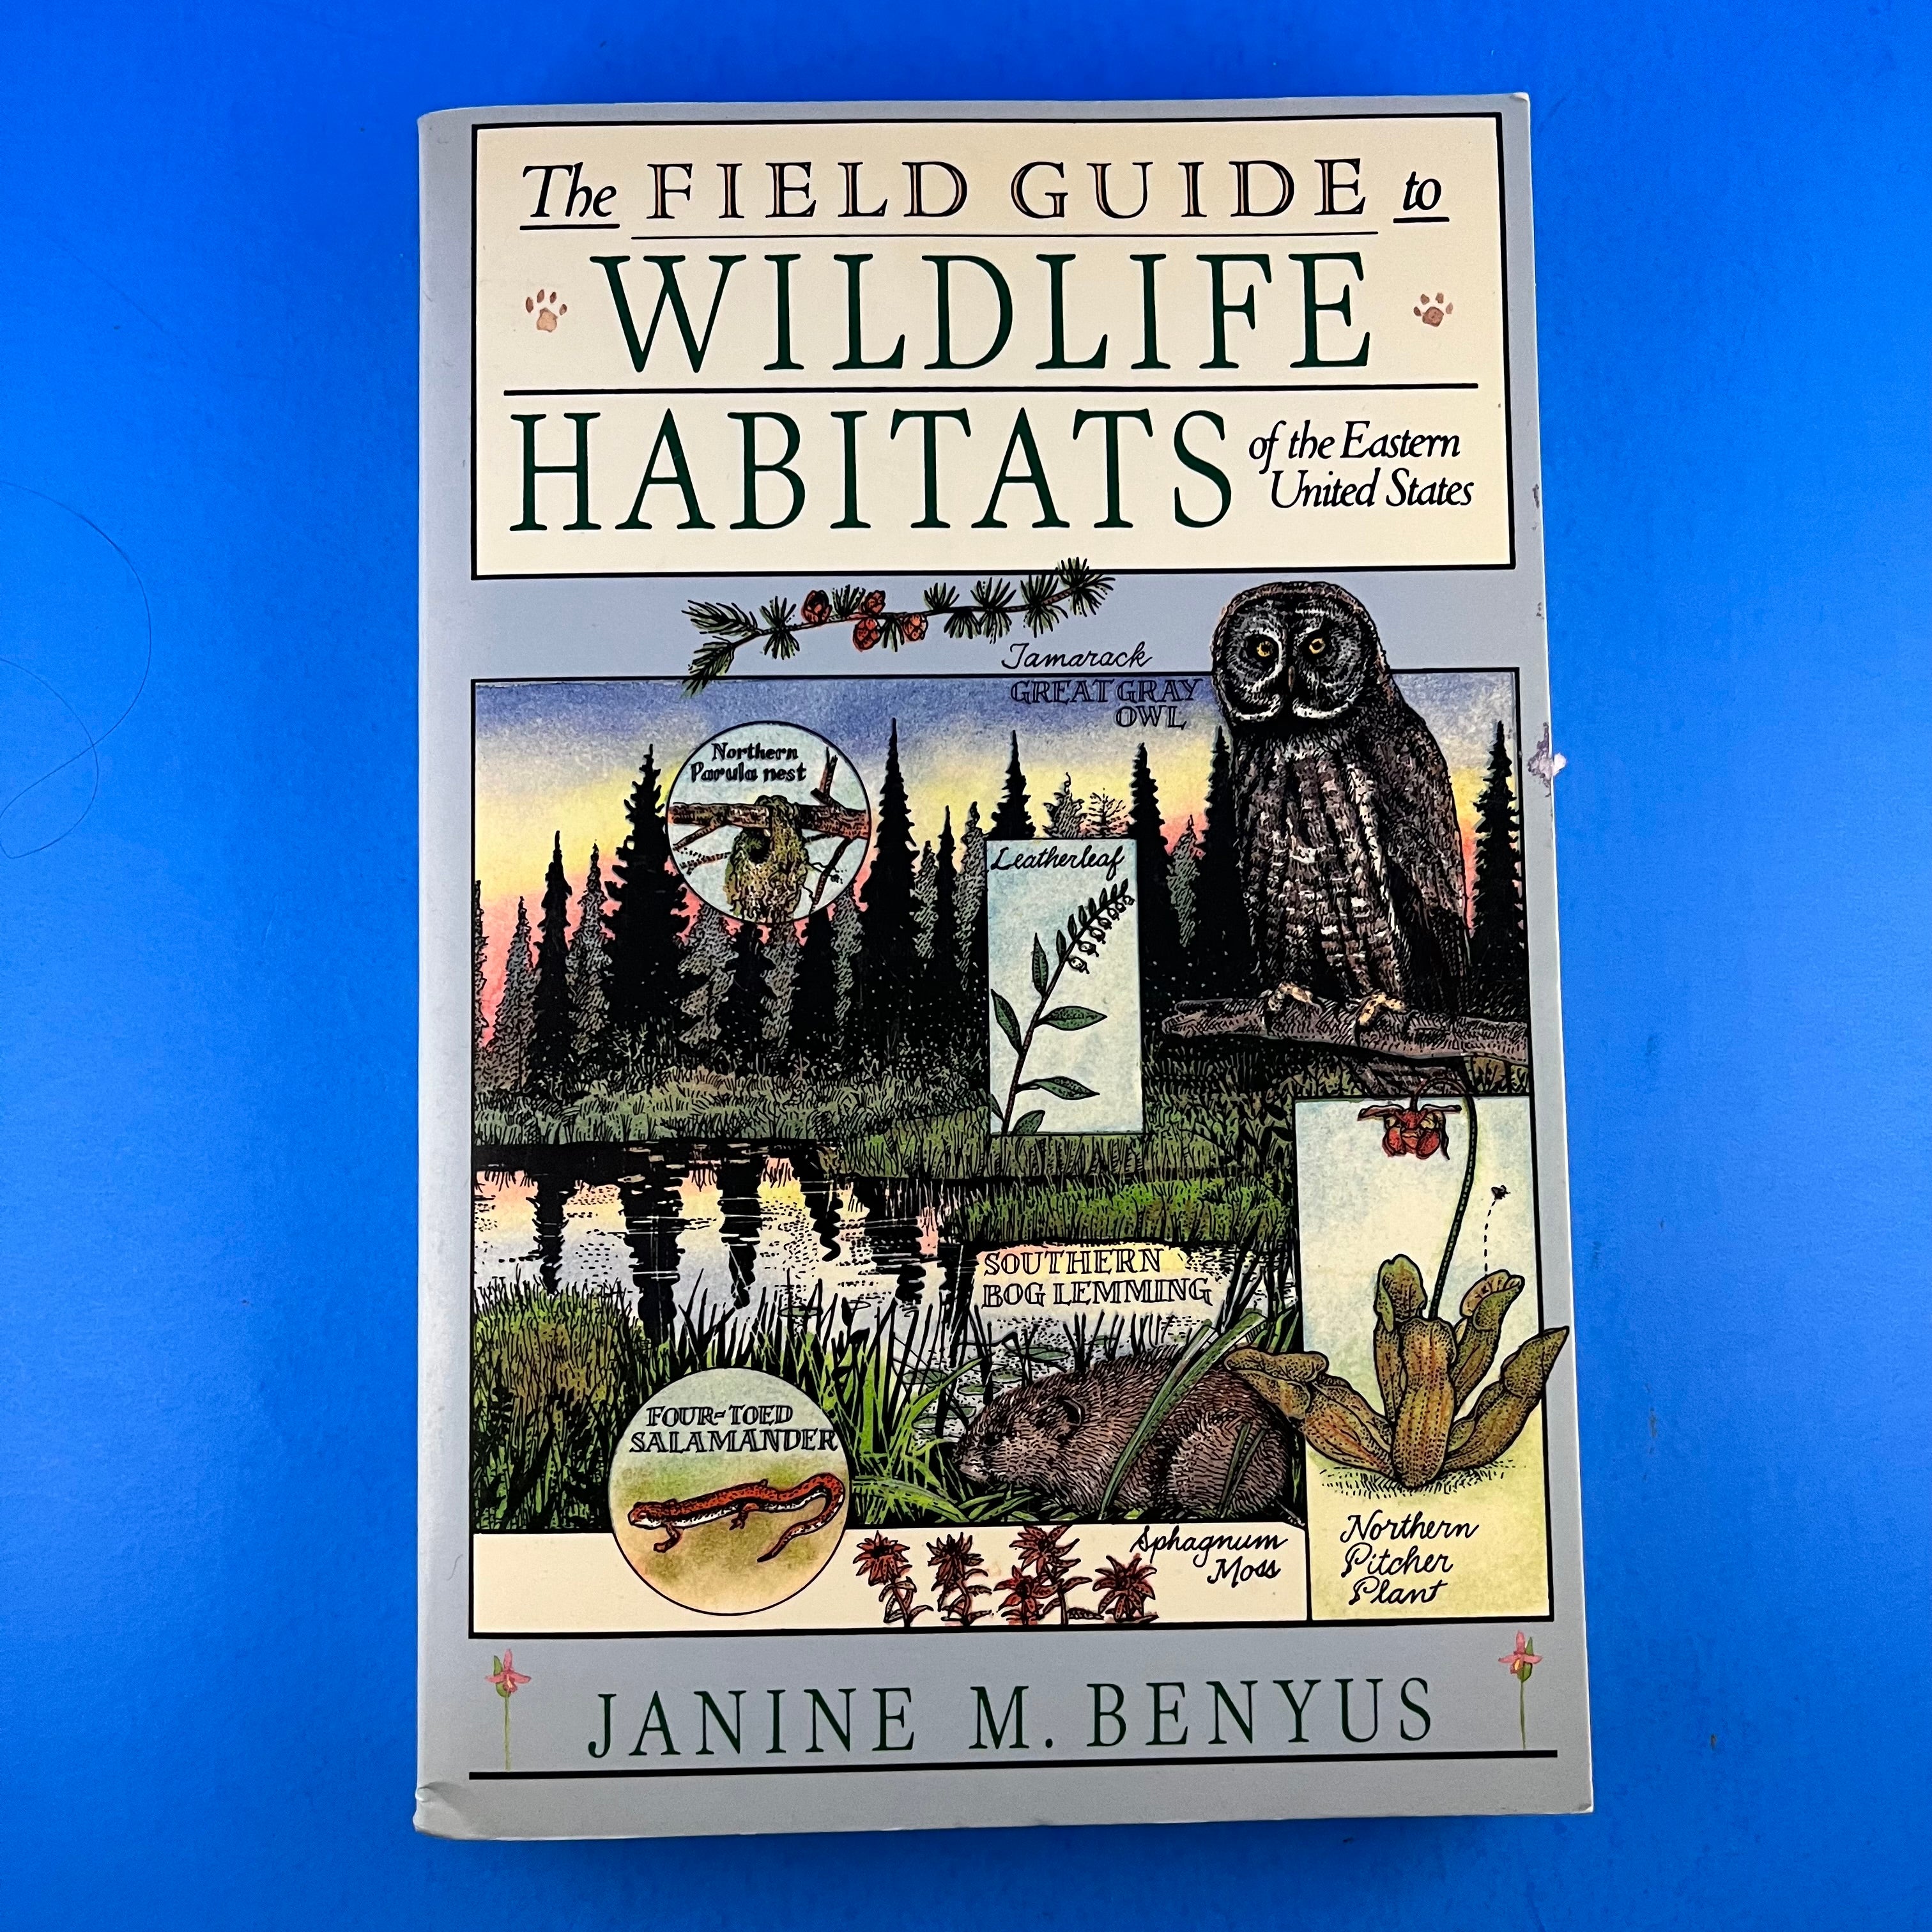 The Field Guide to Wildlife Habitats of the